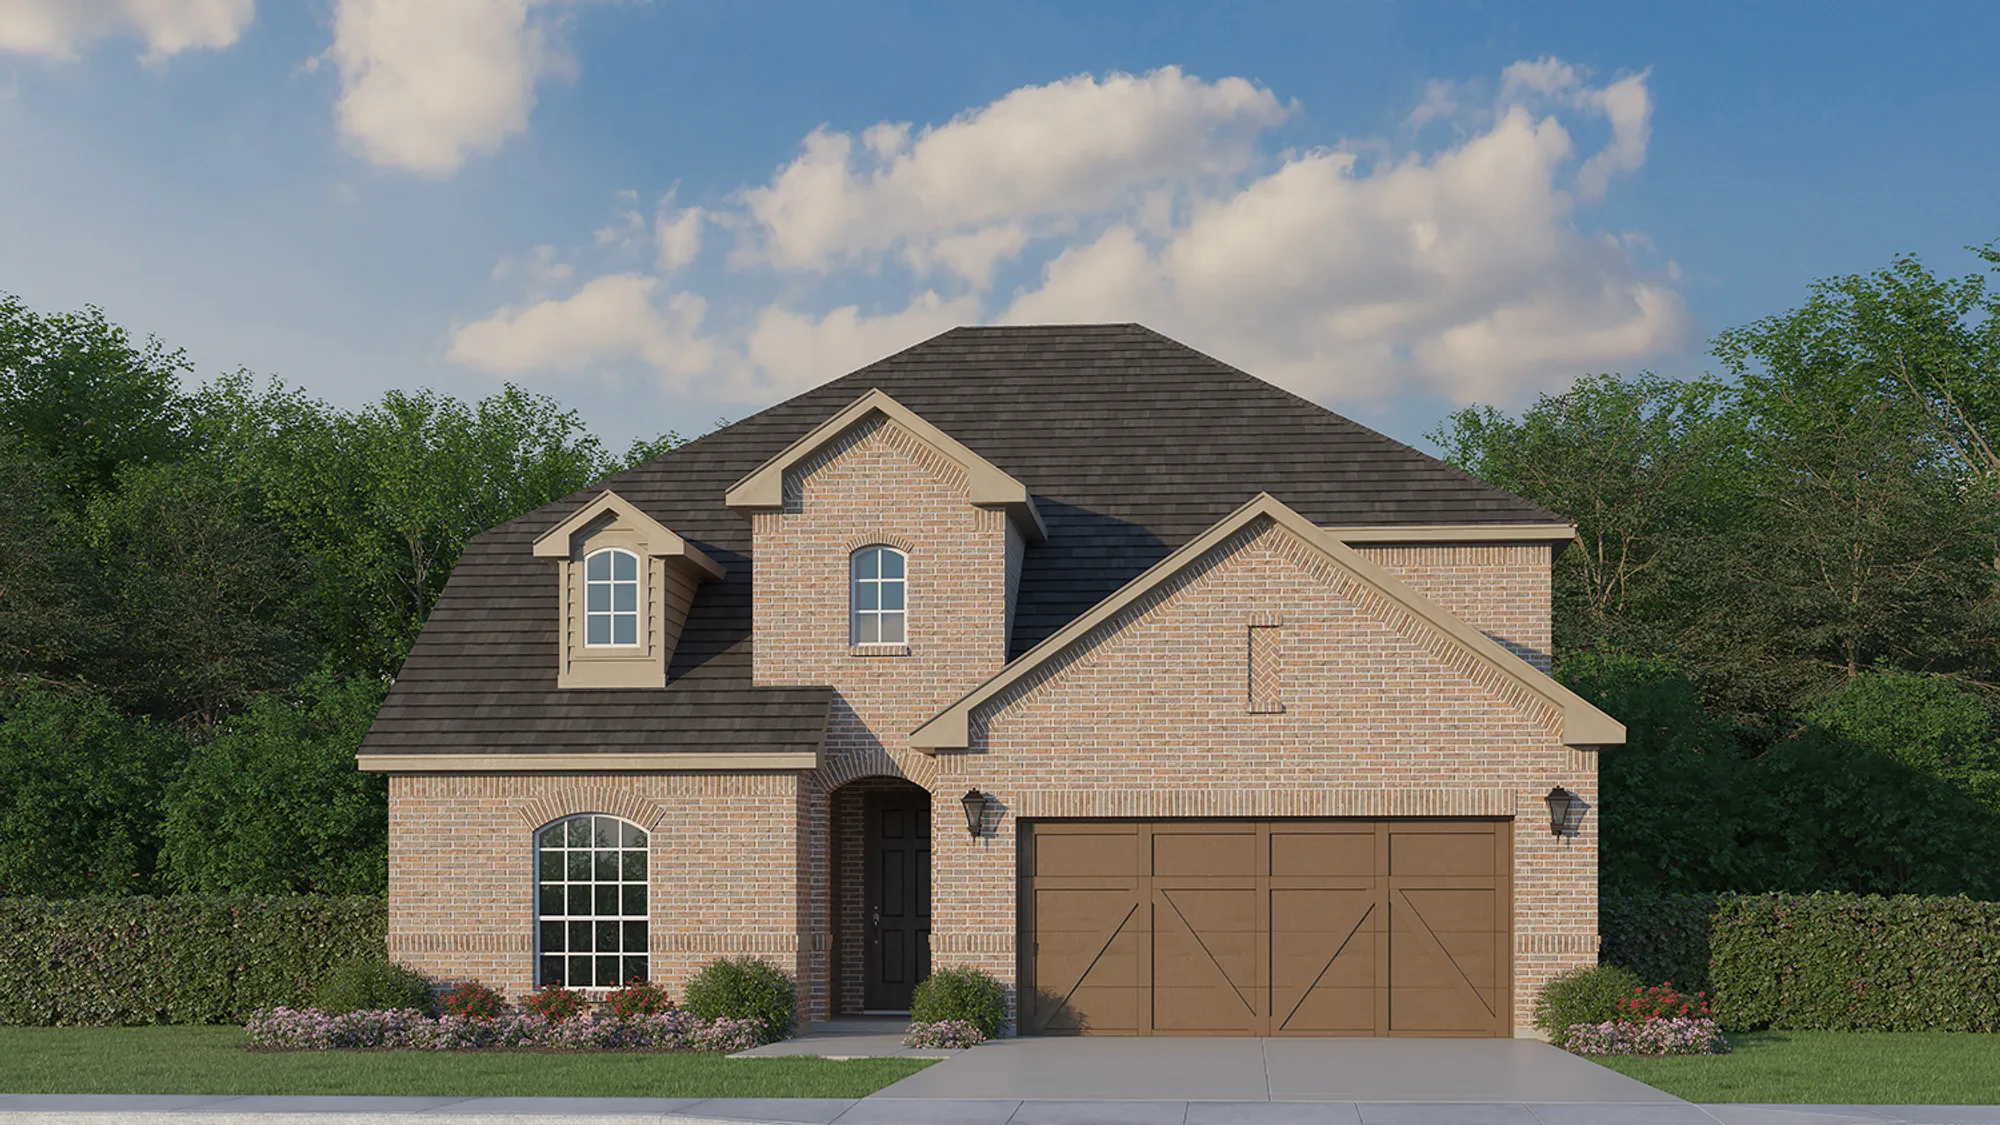 Plan 1531 Elevation A by American Legend Homes